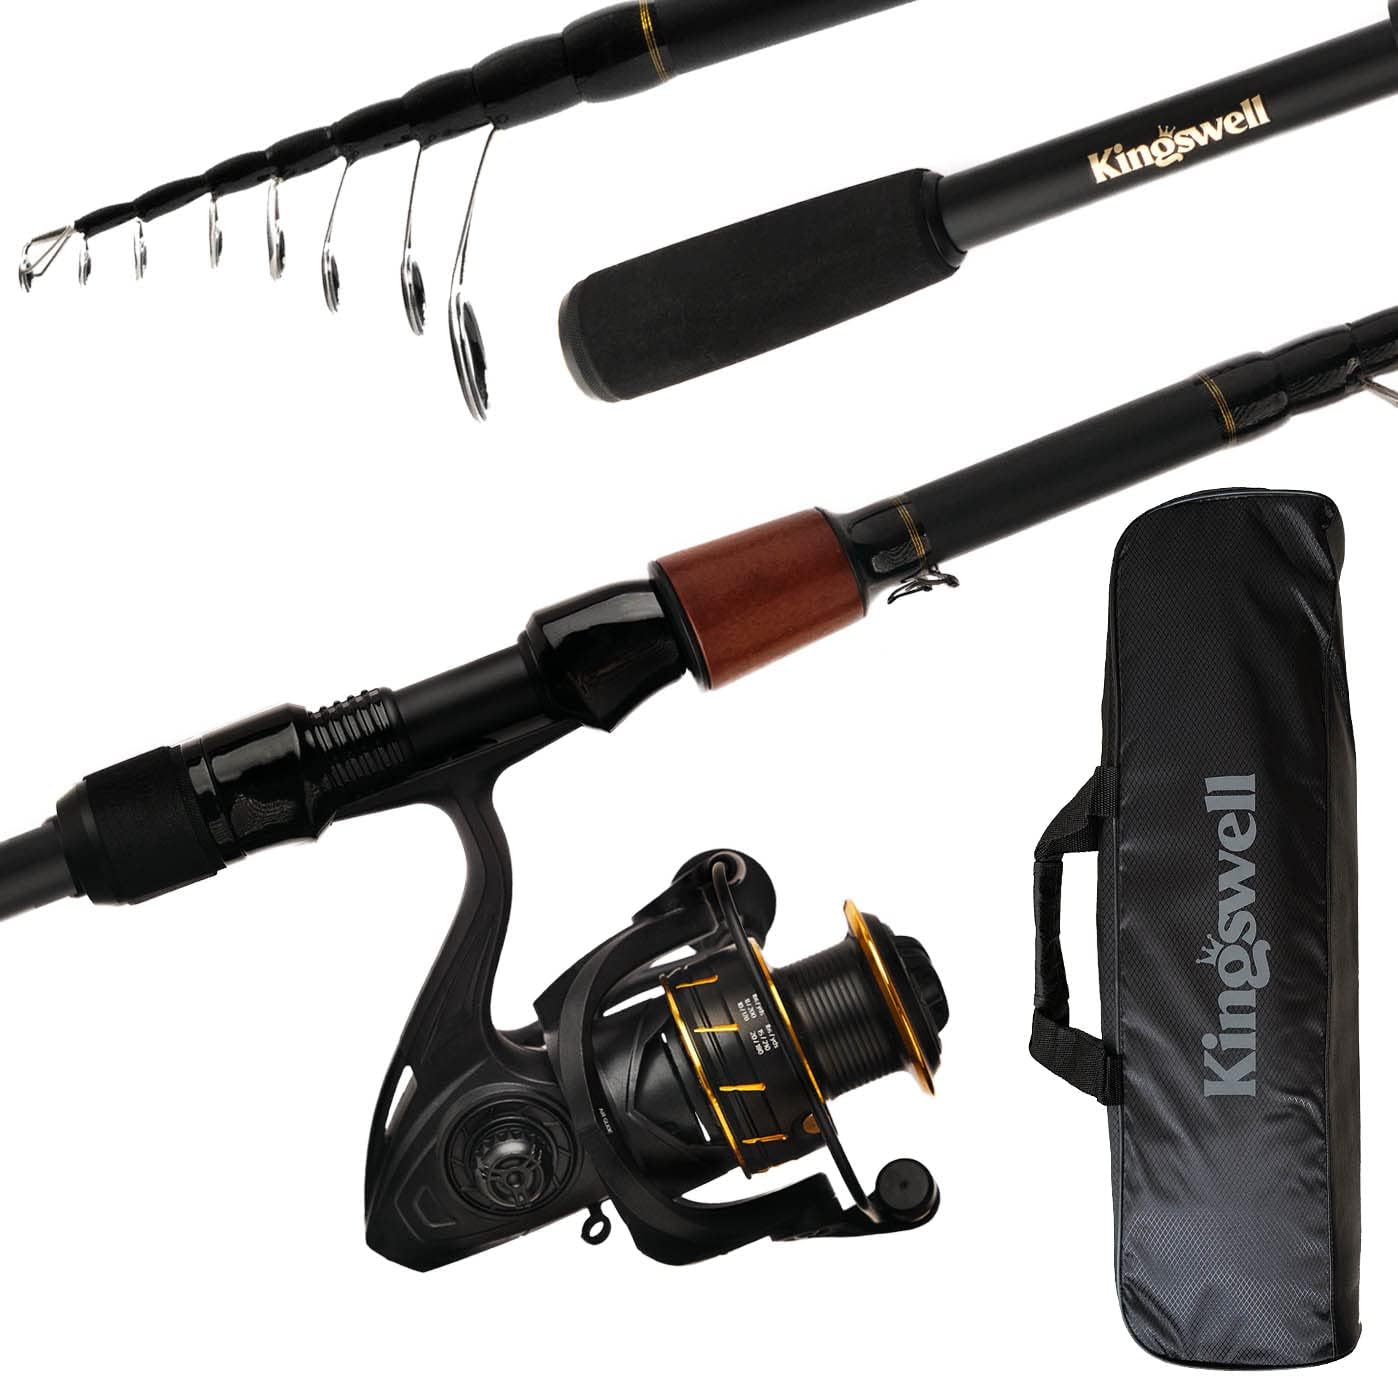 KINGSWELL Telescopic Fishing Rod and Reel Combo, Premium Graphite Carbon Collapsible Fishing Pole with Spinning Reel, Portable Travel kit for Adults Kids